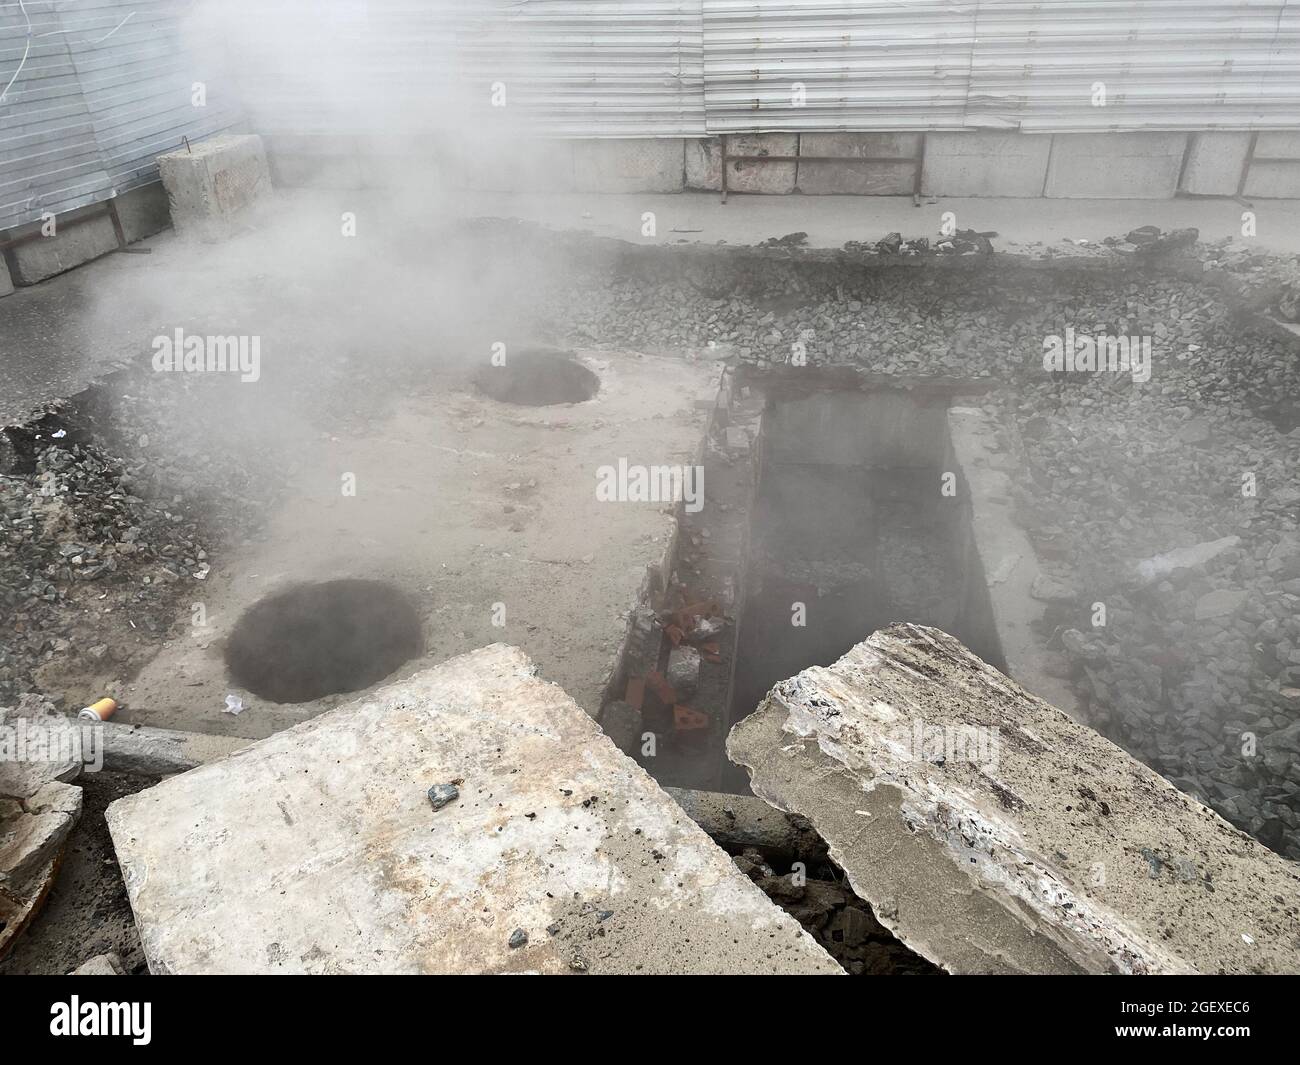 Repair of the heating main. The underground pipe through which steam flows is damaged Stock Photo